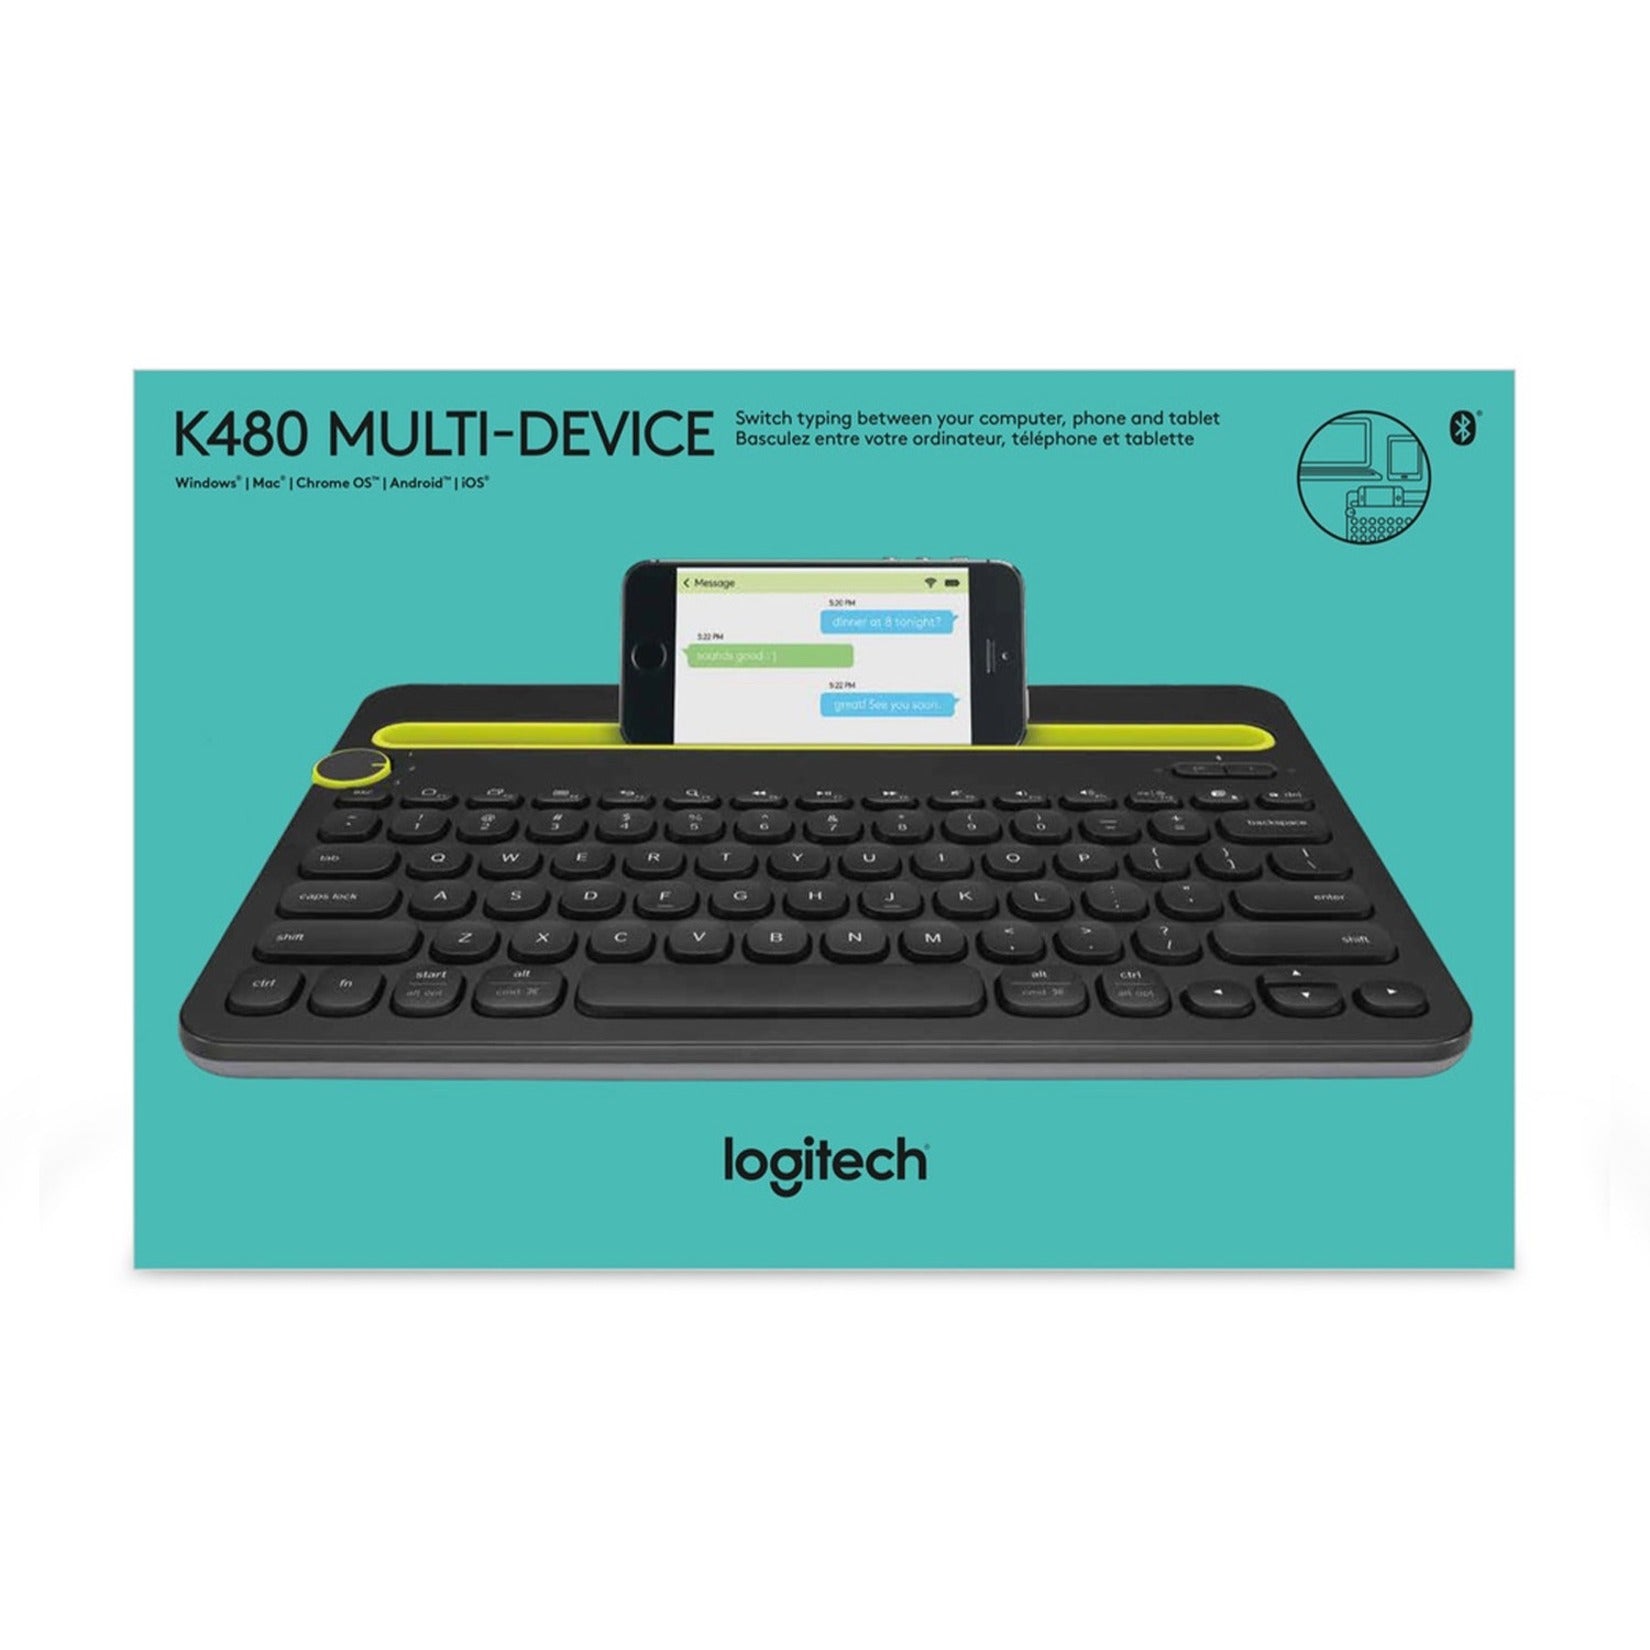 Logitech 920-006342 Bluetooth Multi-Device Keyboard K480, Wireless QWERTY Keyboard for Smartphone, Tablet, and Computer